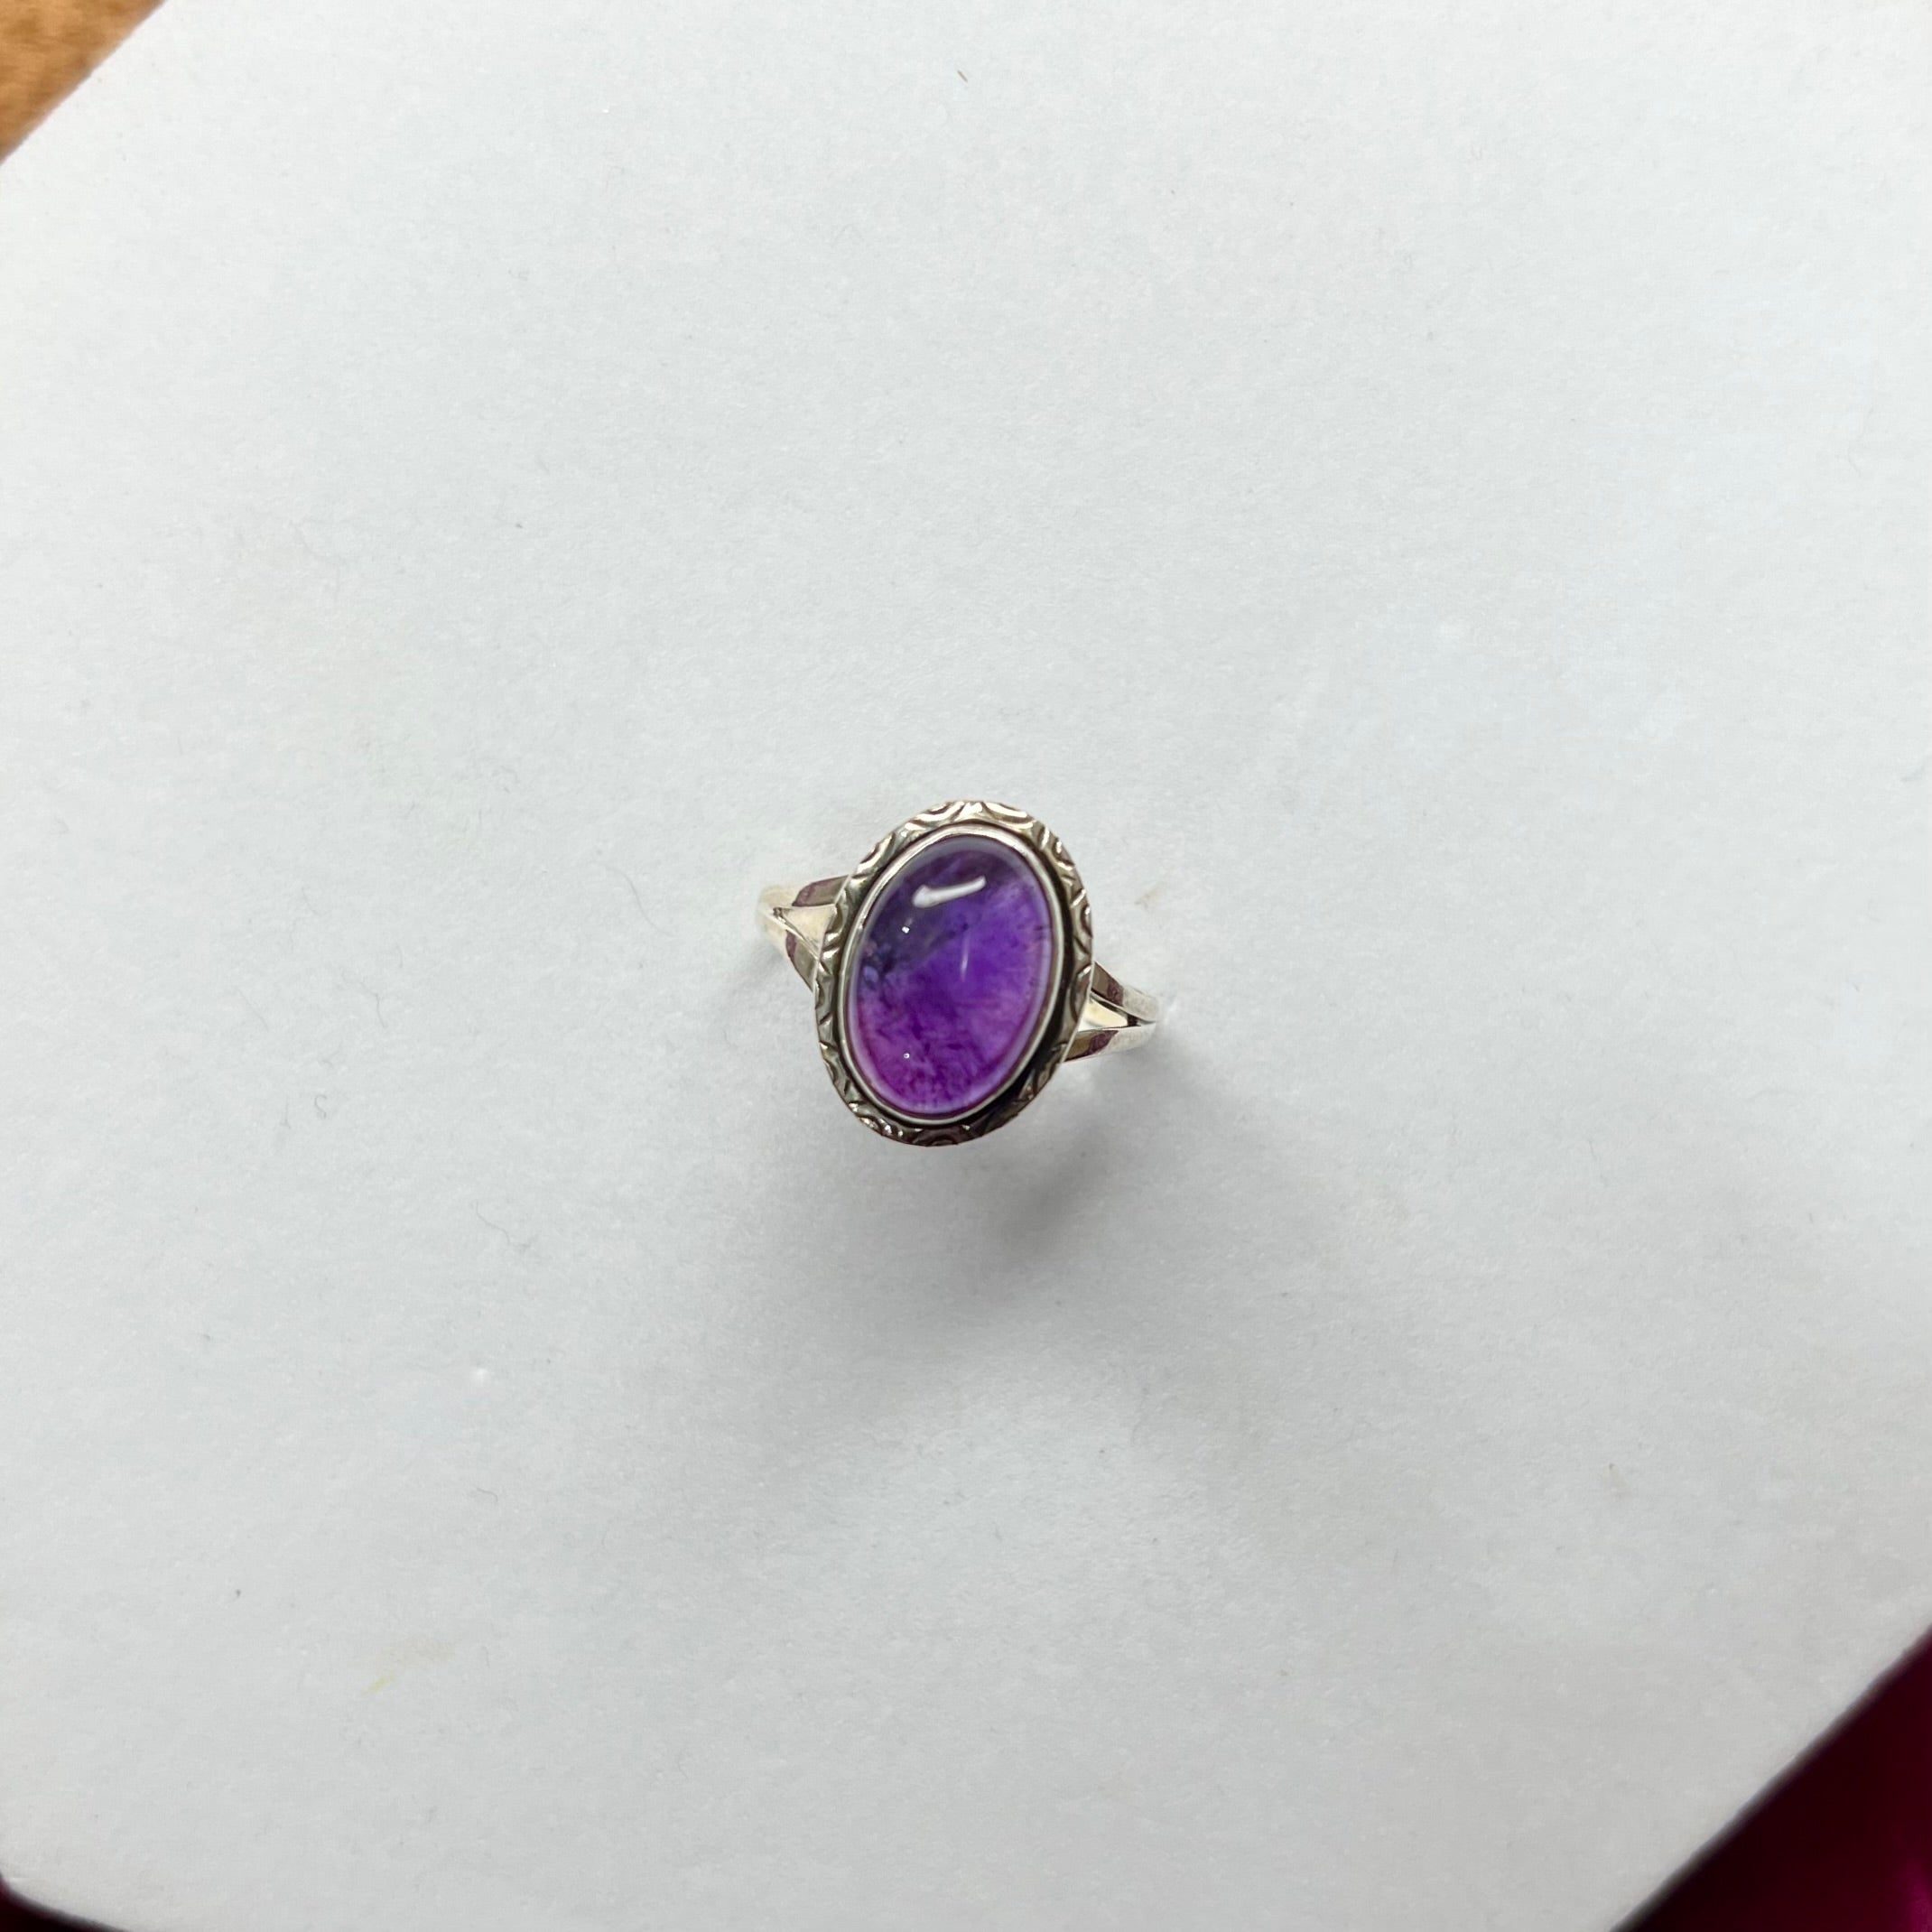 HANDCRAFTED AMETHYST RING-SILVER 925